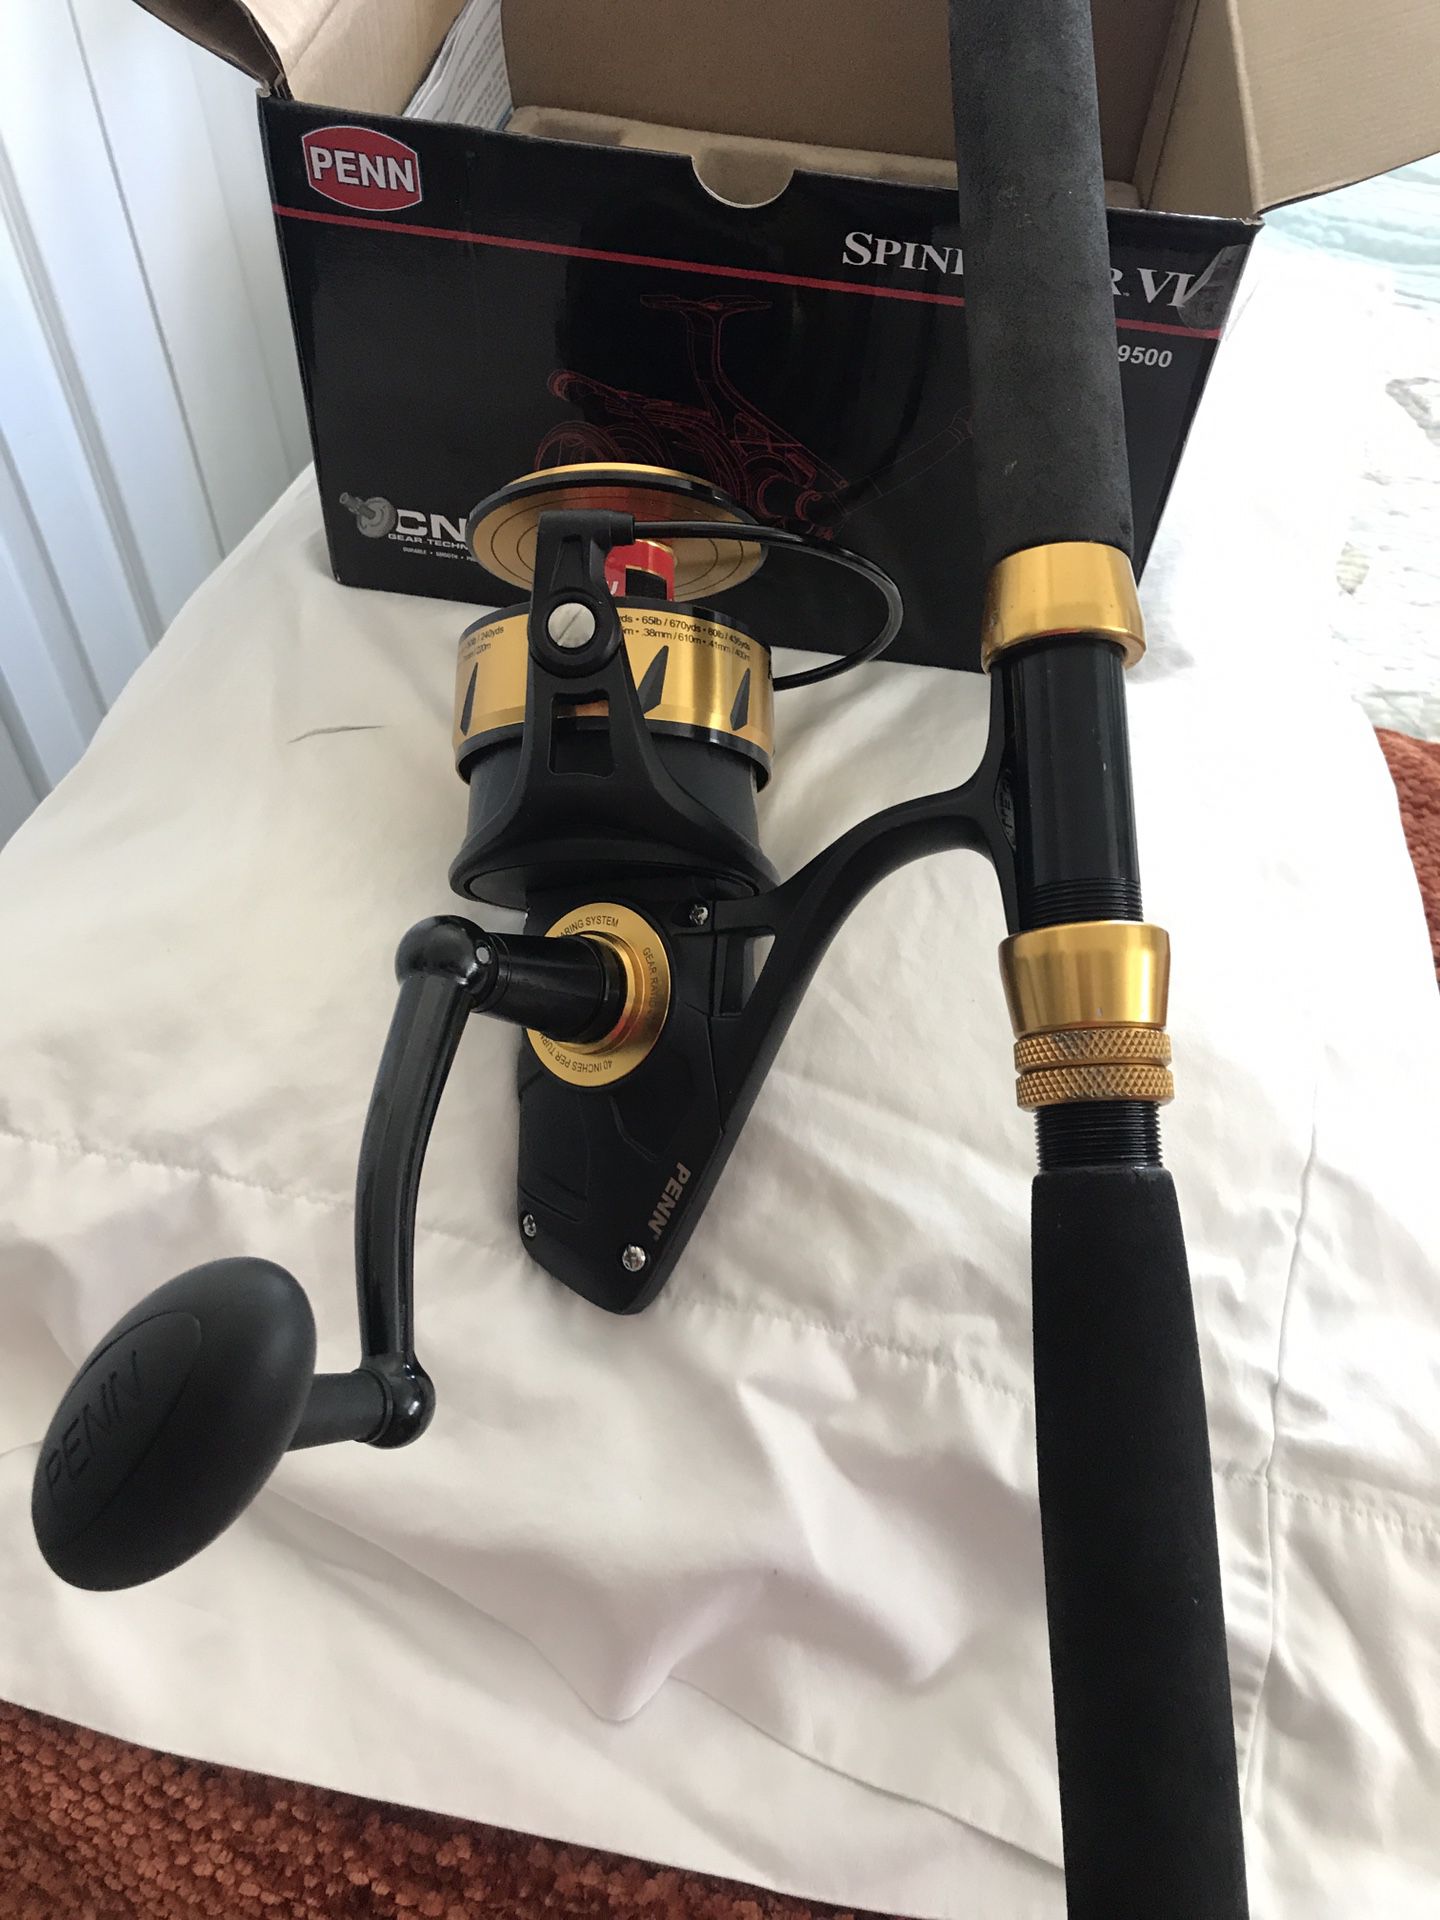 Penn Spinfisher VI 9500 Reel (BNIB) On Chaos 7' Rod Fishing Combo for Sale  in Largo, FL - OfferUp